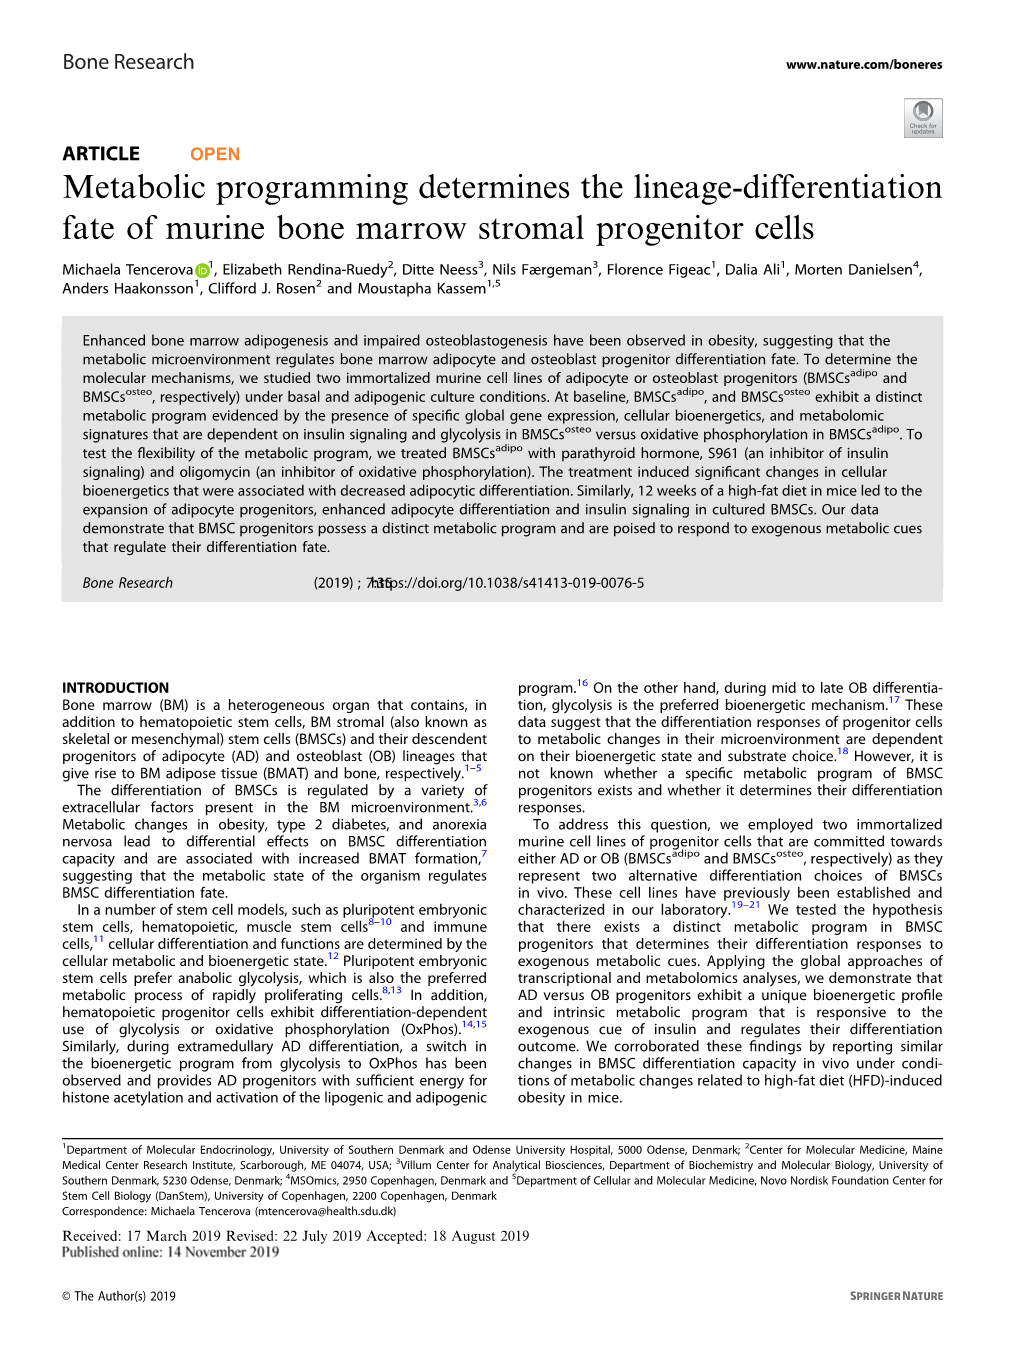 Metabolic Programming Determines the Lineage-Differentiation Fate of Murine Bone Marrow Stromal Progenitor Cells